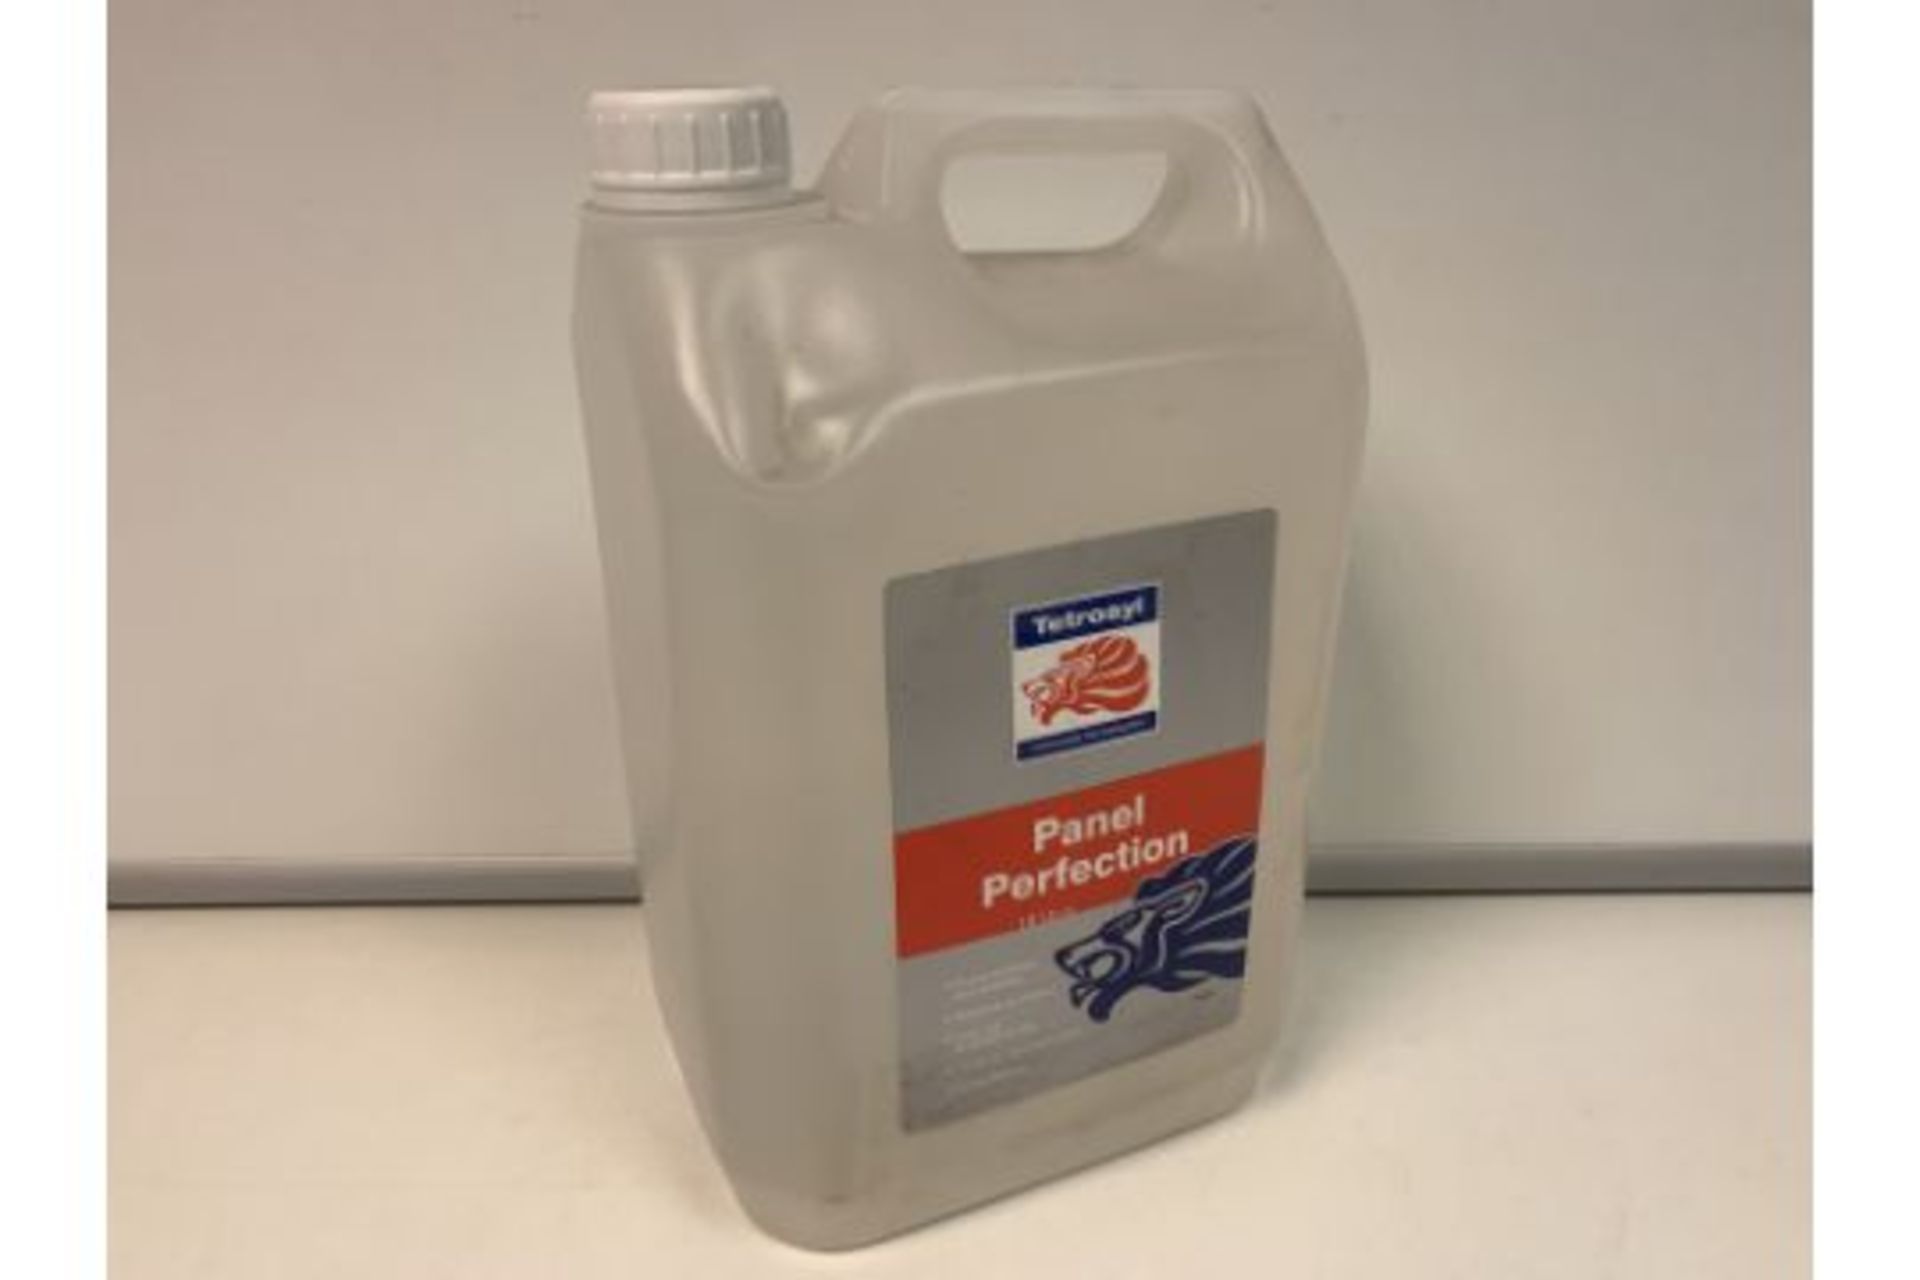 12 X NEW SEALED 5L TUBS OF TETROSYL PANEL PERFECTION. Pre Wipe 5l Degreaser & Silicone Remover. (